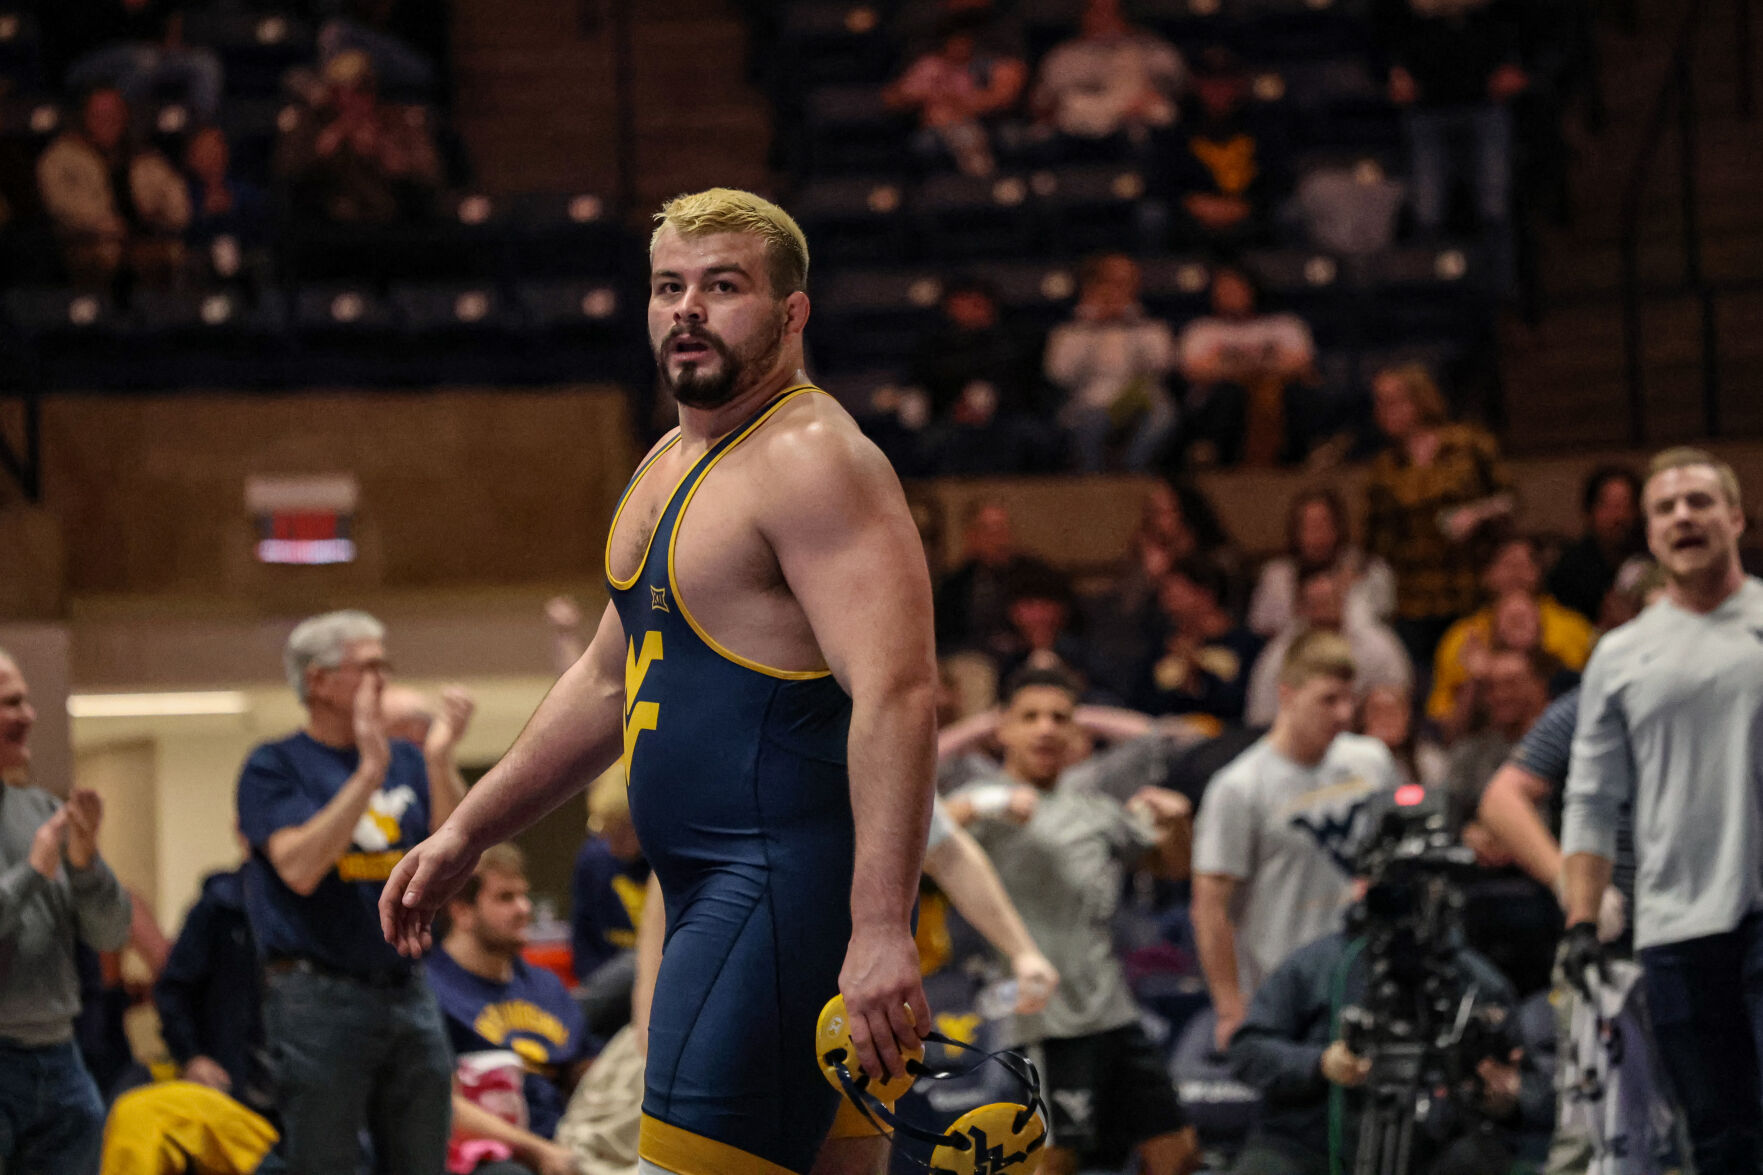 WVU wrestling goes down to the wire with Clarion Wrestling thedaonline